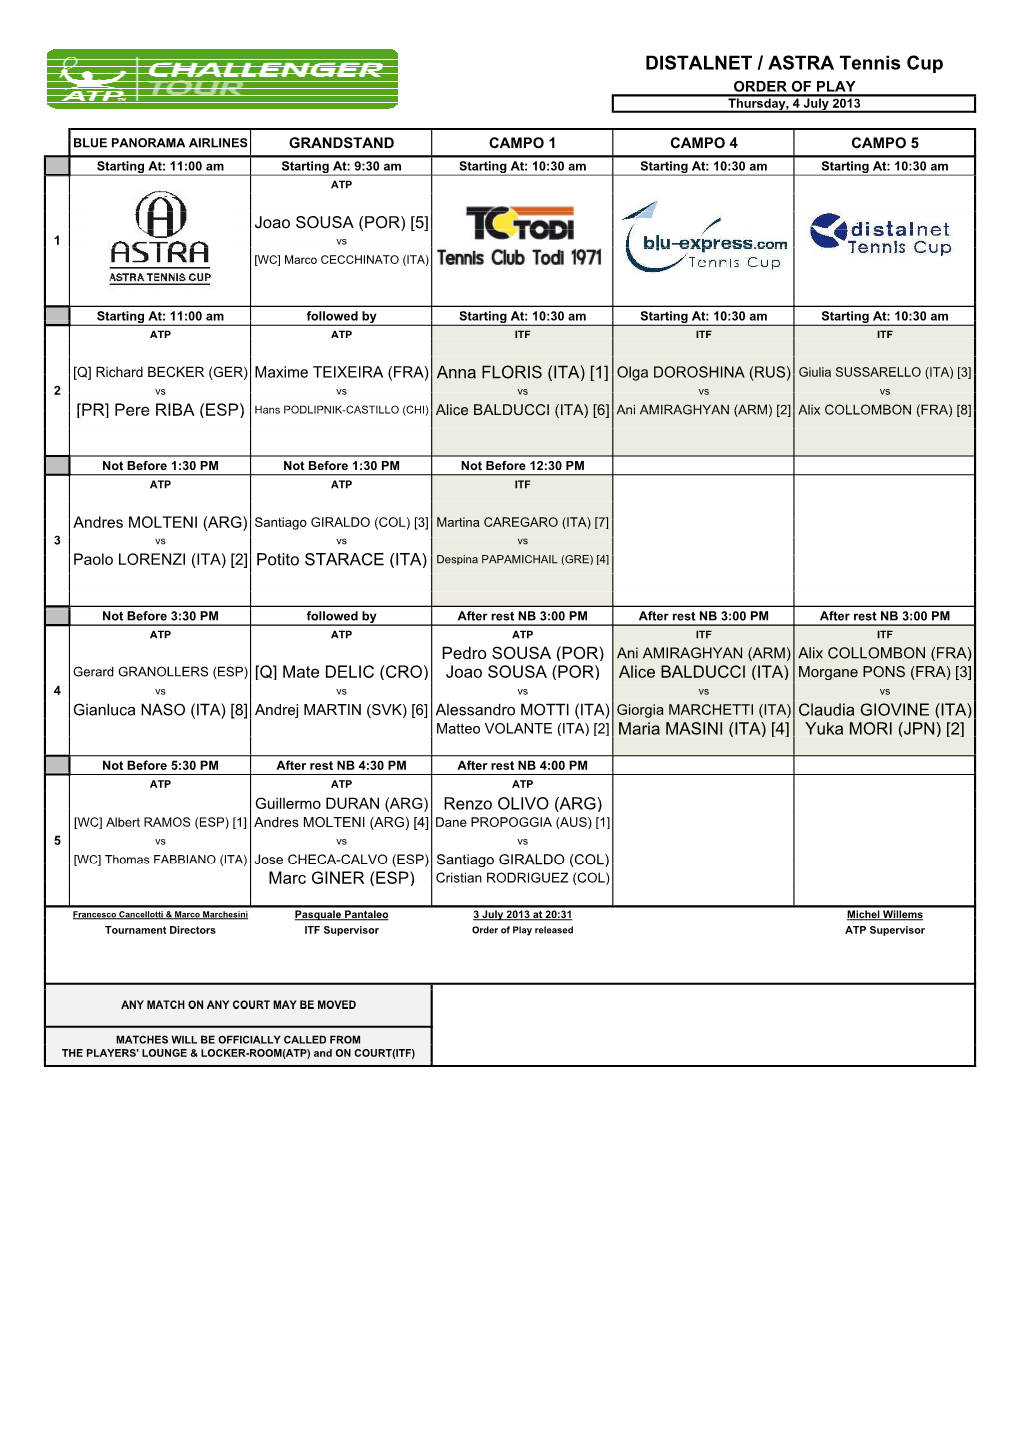 DISTALNET / ASTRA Tennis Cup ORDER of PLAY Thursday, 4 July 2013